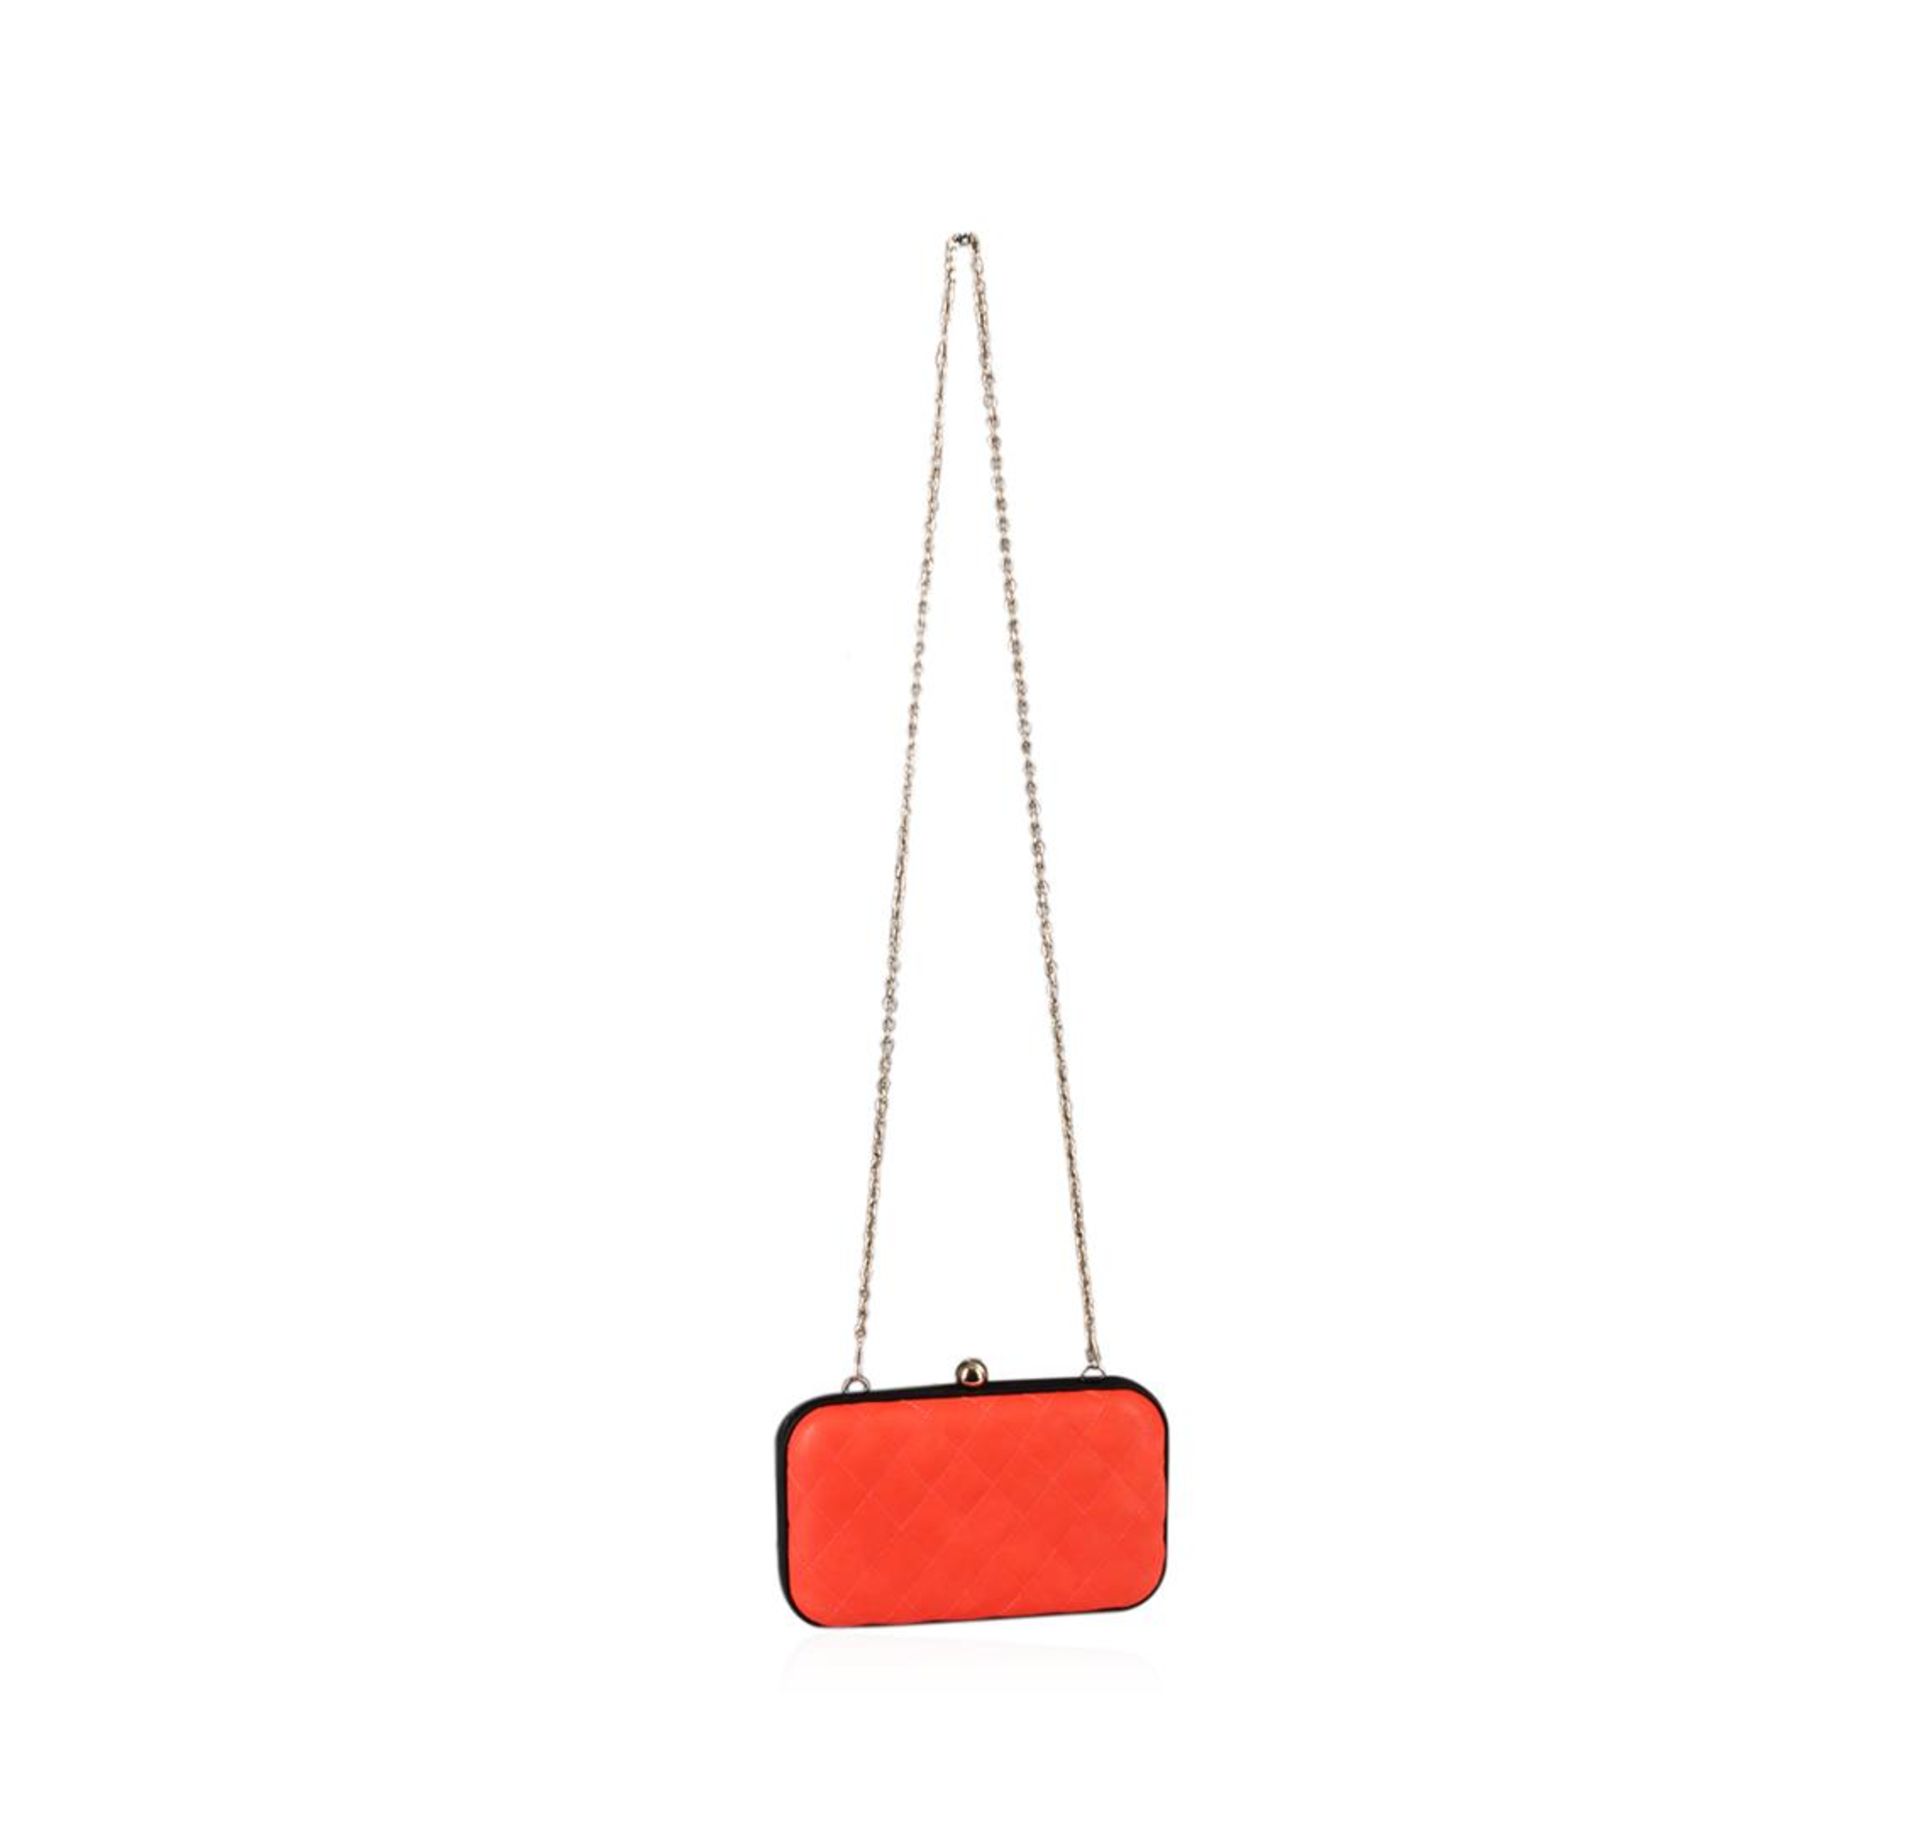 Coral Tufted Evening Clutch - Image 3 of 3